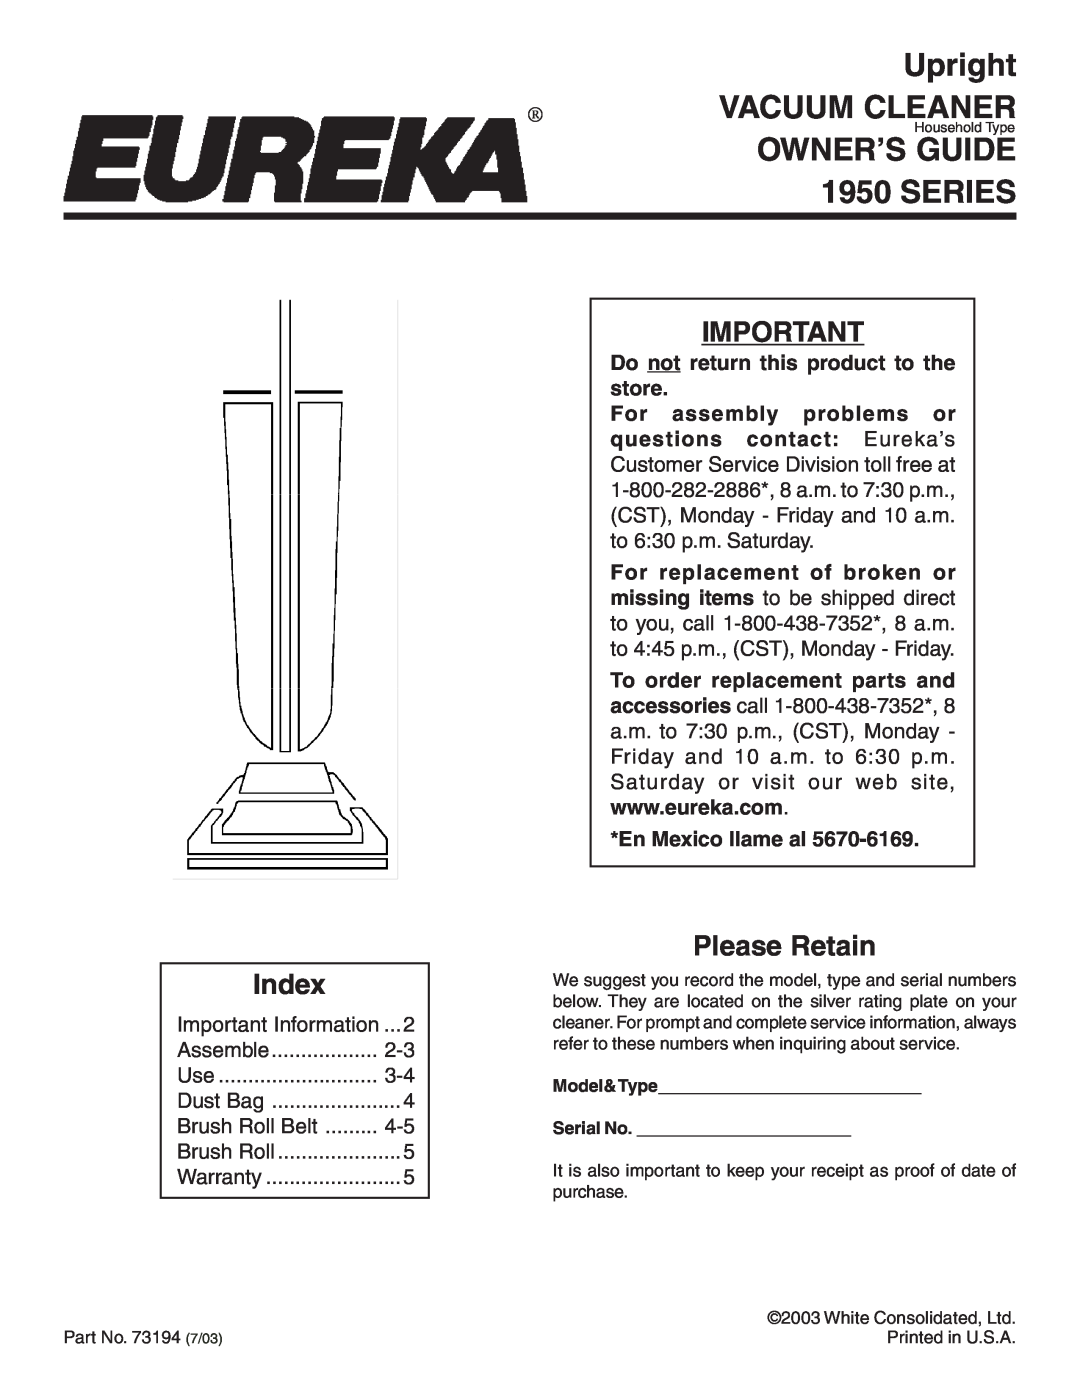 Eureka 1950 warranty Upright, Vacuum Cleaner, Owner’S Guide, Series, Do not return this product to the store, Index 